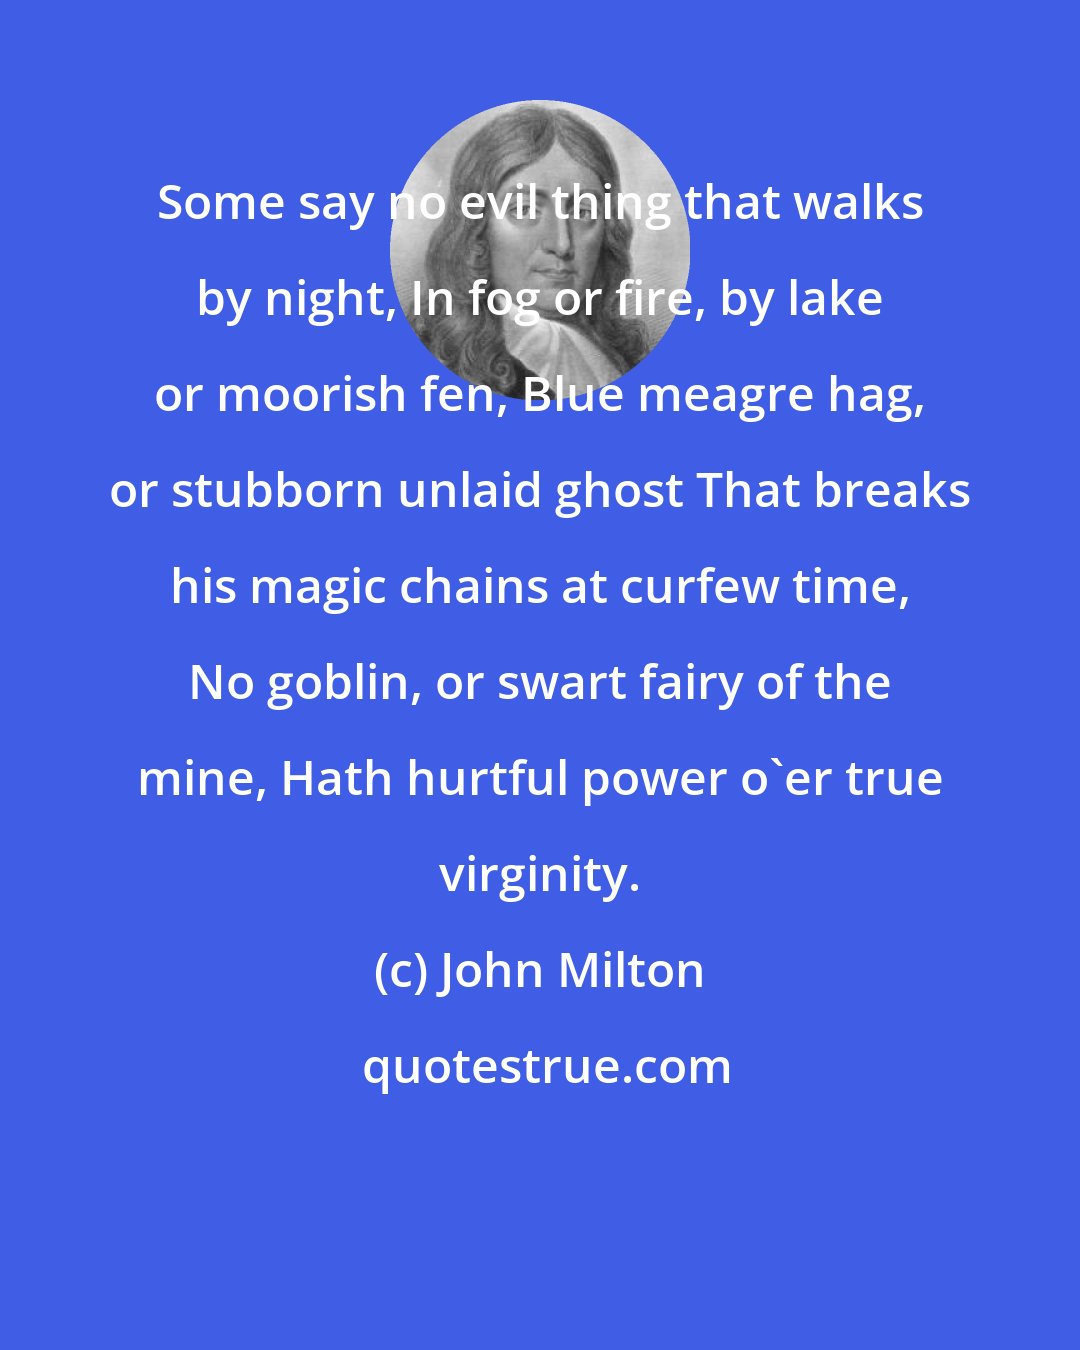 John Milton: Some say no evil thing that walks by night, In fog or fire, by lake or moorish fen, Blue meagre hag, or stubborn unlaid ghost That breaks his magic chains at curfew time, No goblin, or swart fairy of the mine, Hath hurtful power o'er true virginity.